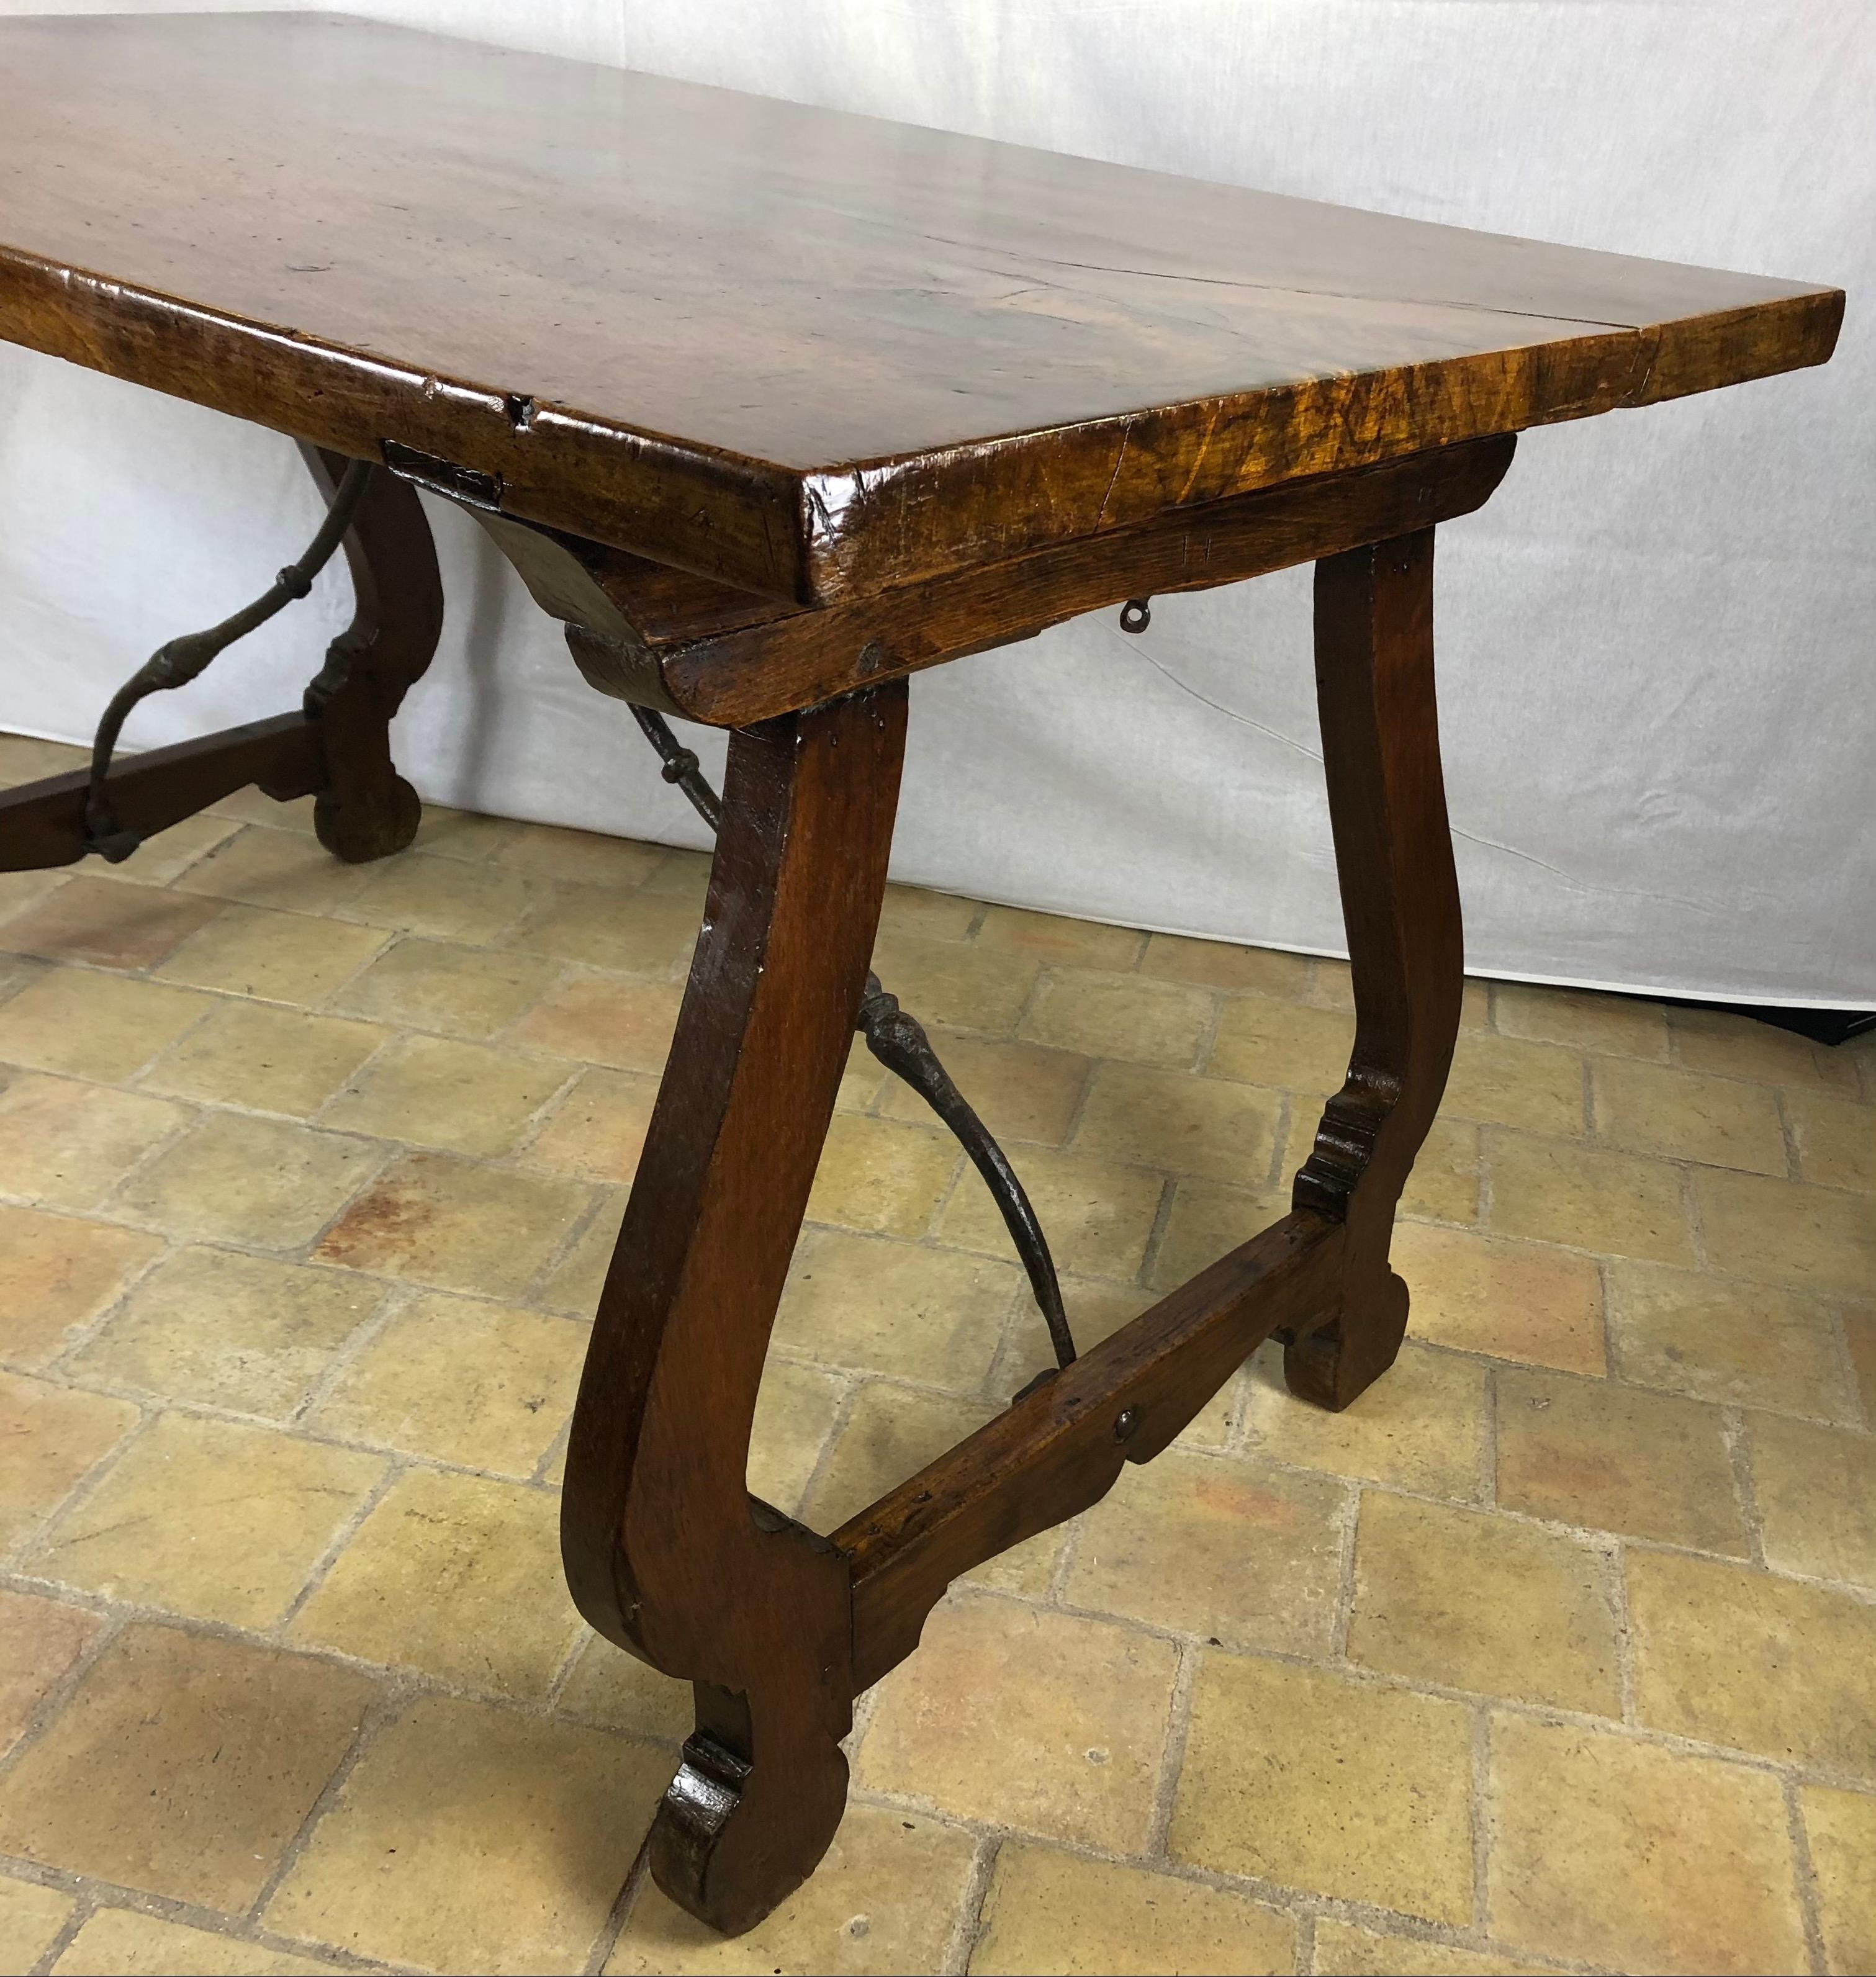 A stunning Italian 18th century walnut trestle table. The table is raised by two sets of scrolled pierced supports connected by the original hand beaten wrought iron stretcher. Above is the elegant French polish walnut rectangular top constructed